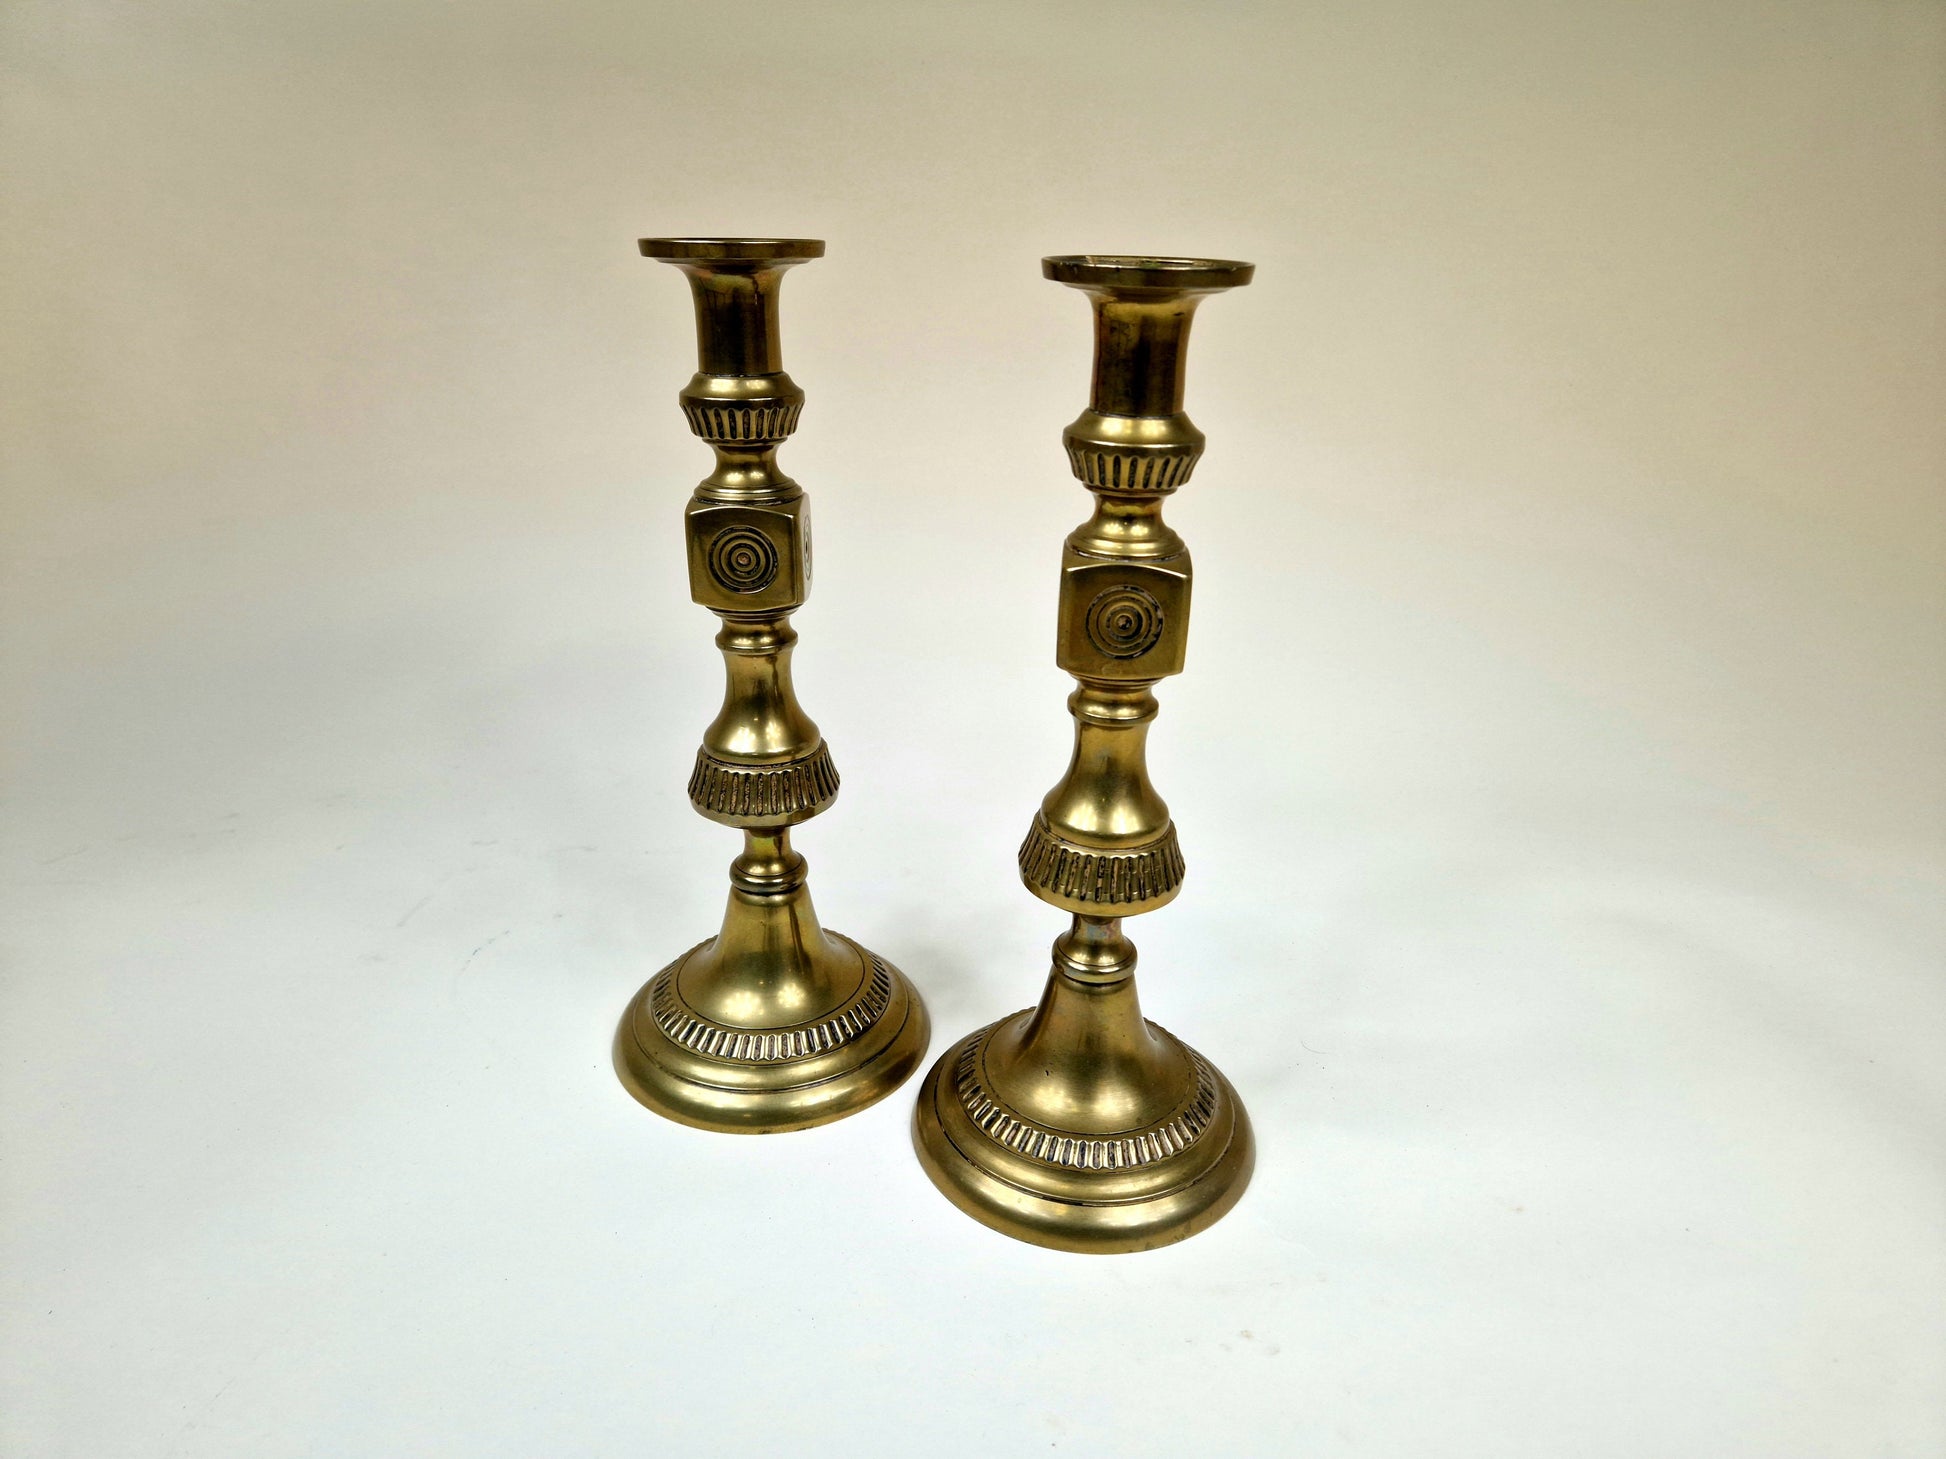  Victorian Candle Holders